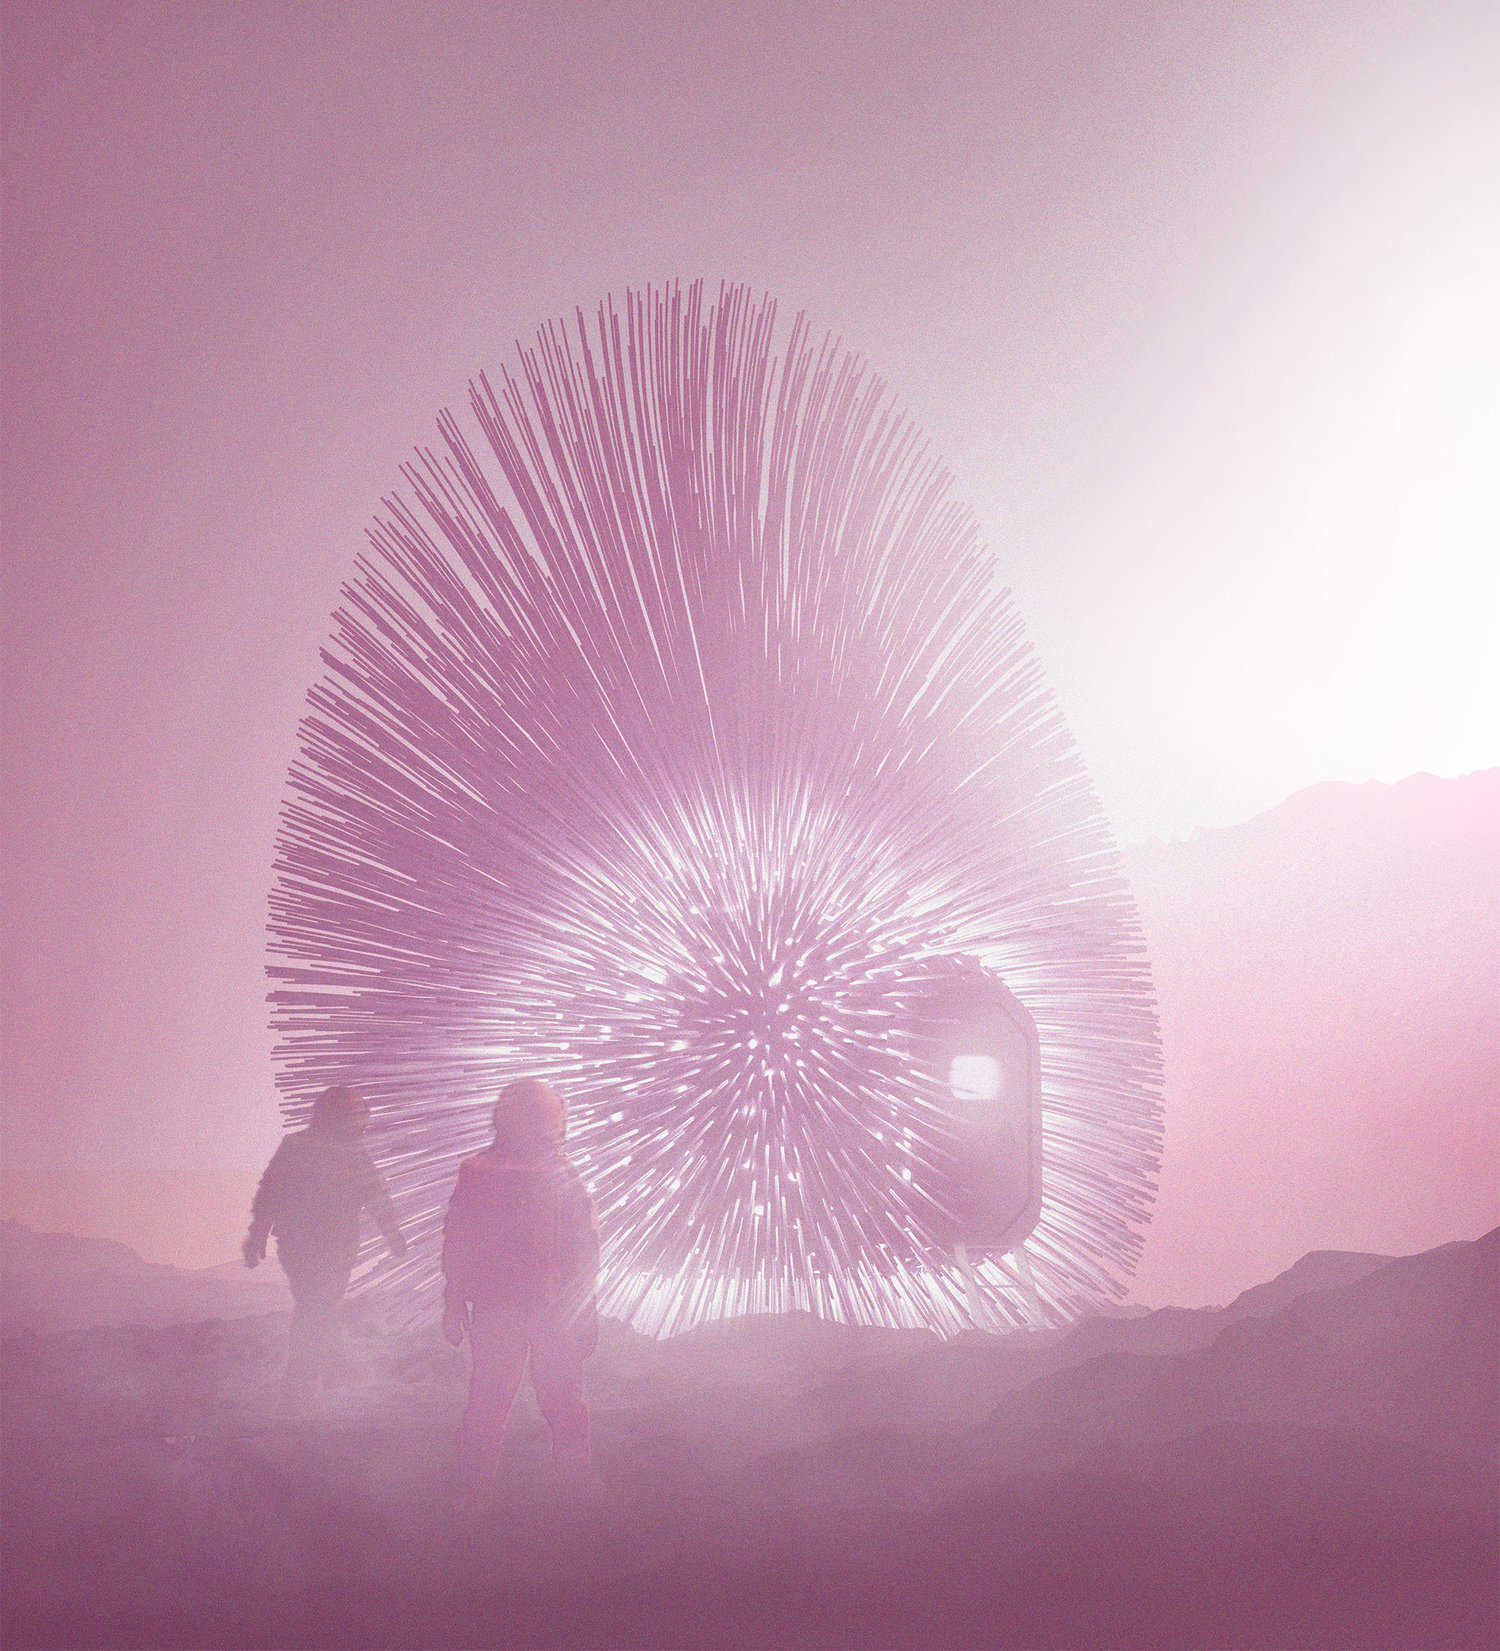 Two astronauts are walking towards the glowing dandelion shelter on mars.